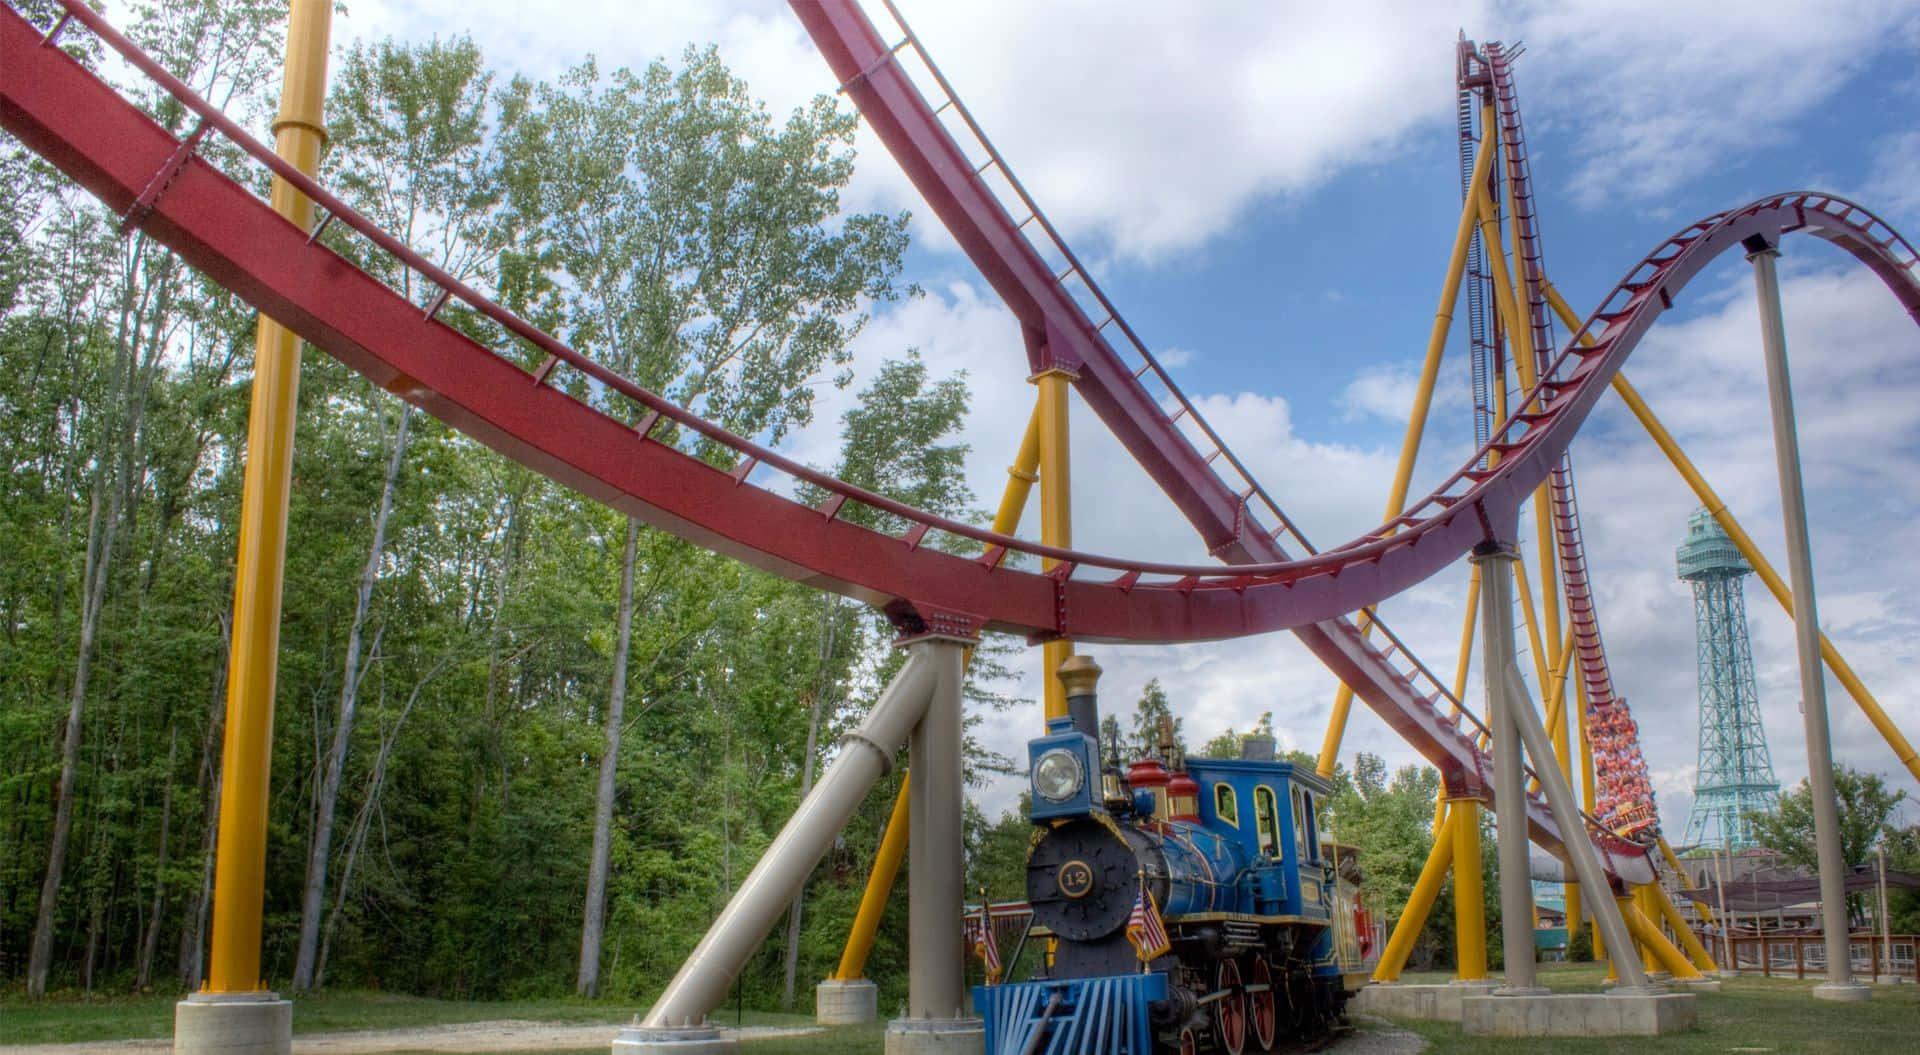 Take a Thrilling Ride on a Roller Coaster